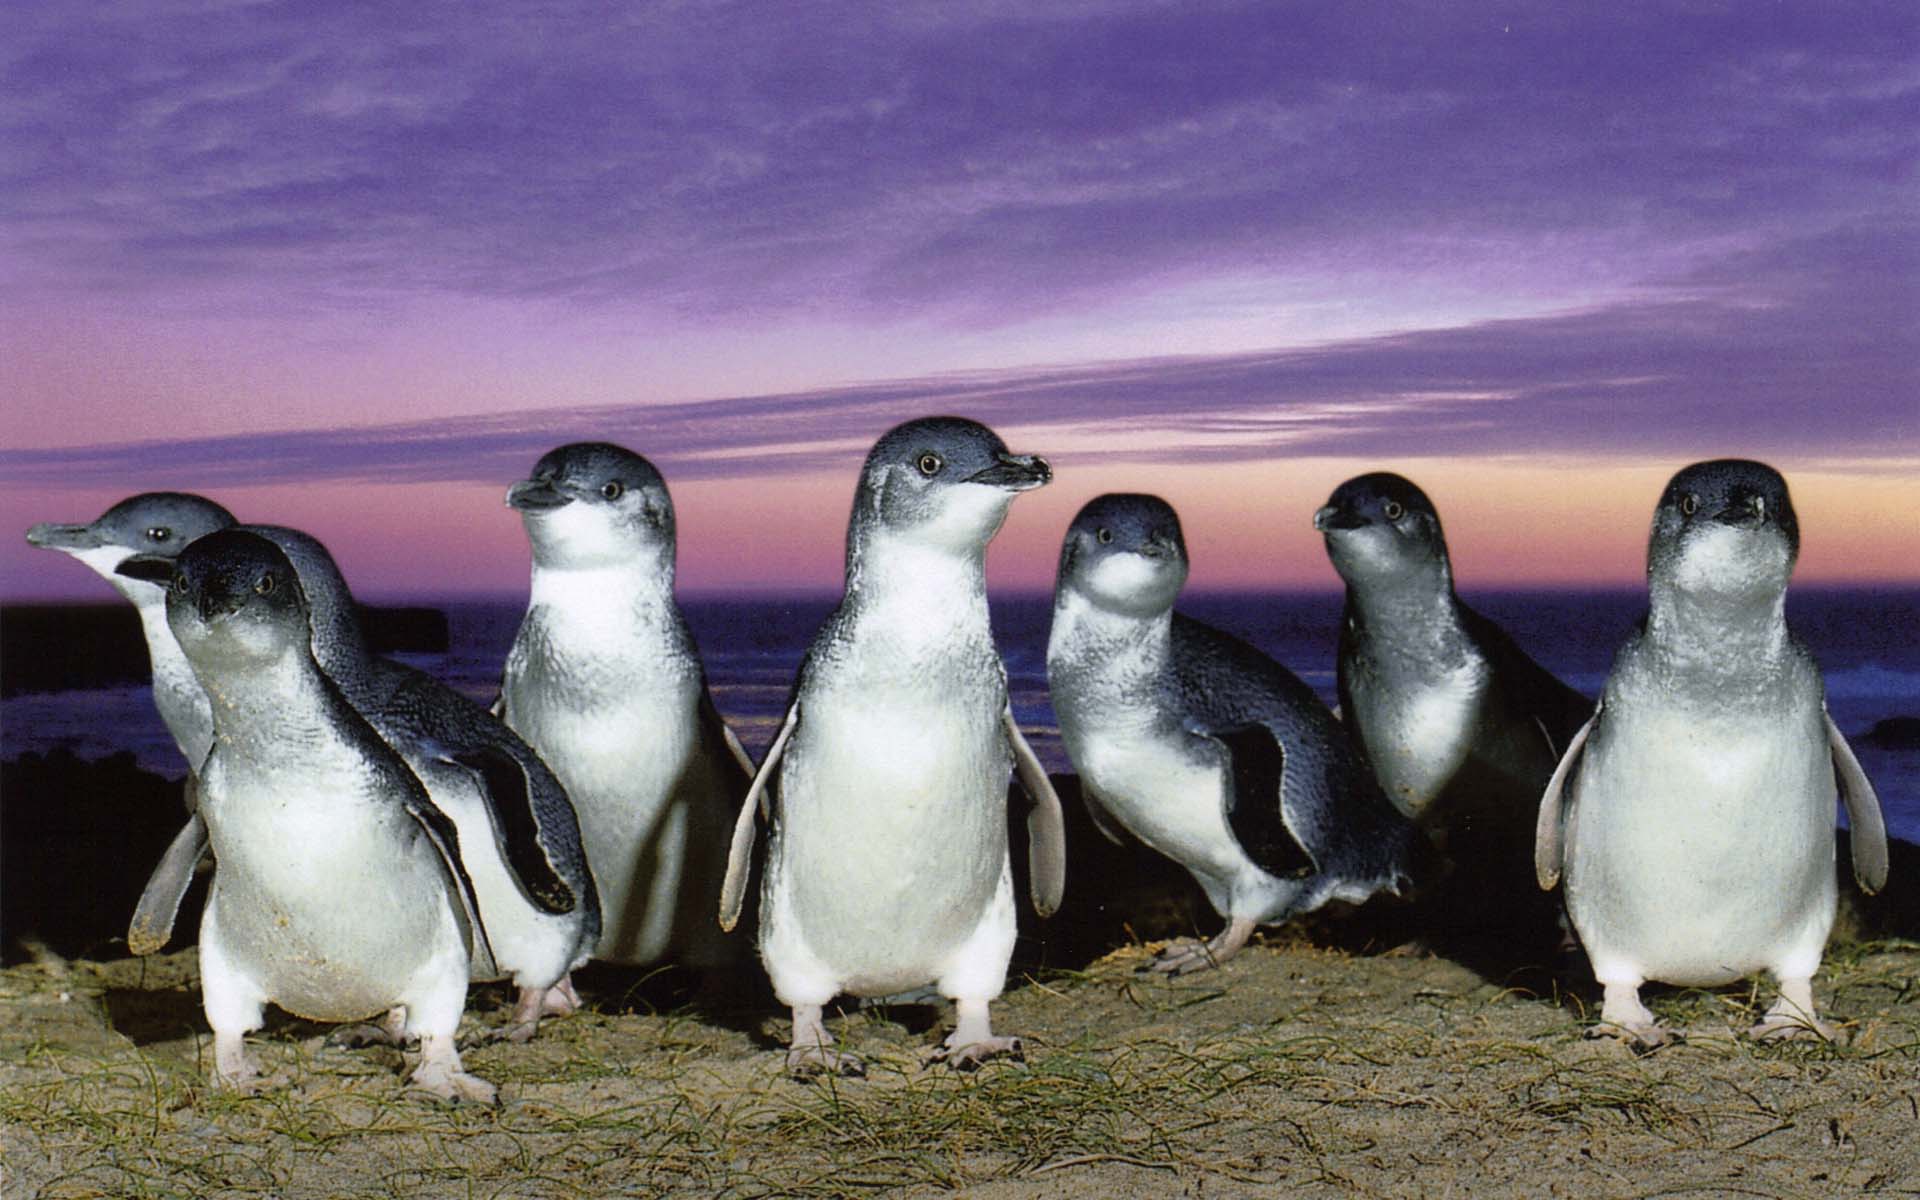 Penguin Parade at Phillip Island - click to see an enlarged version of this image